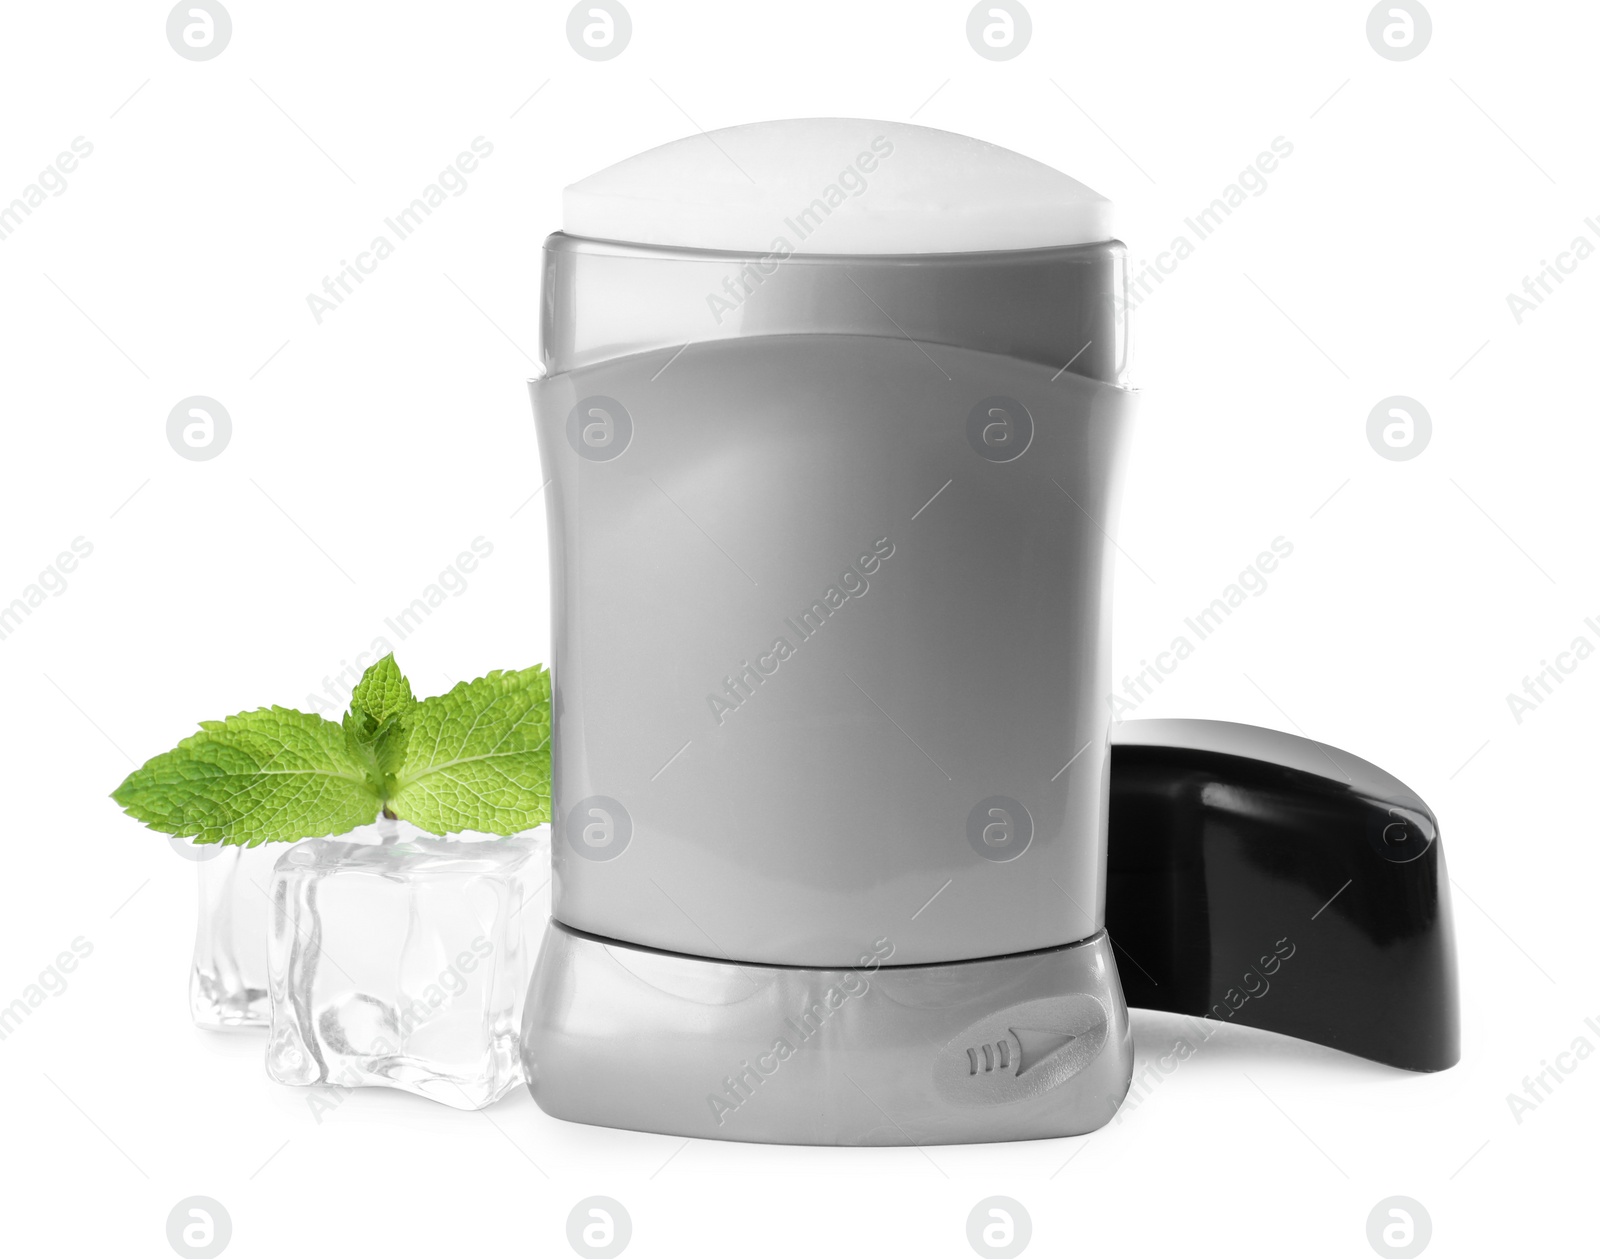 Photo of Natural male deodorant with ice and mint on white background